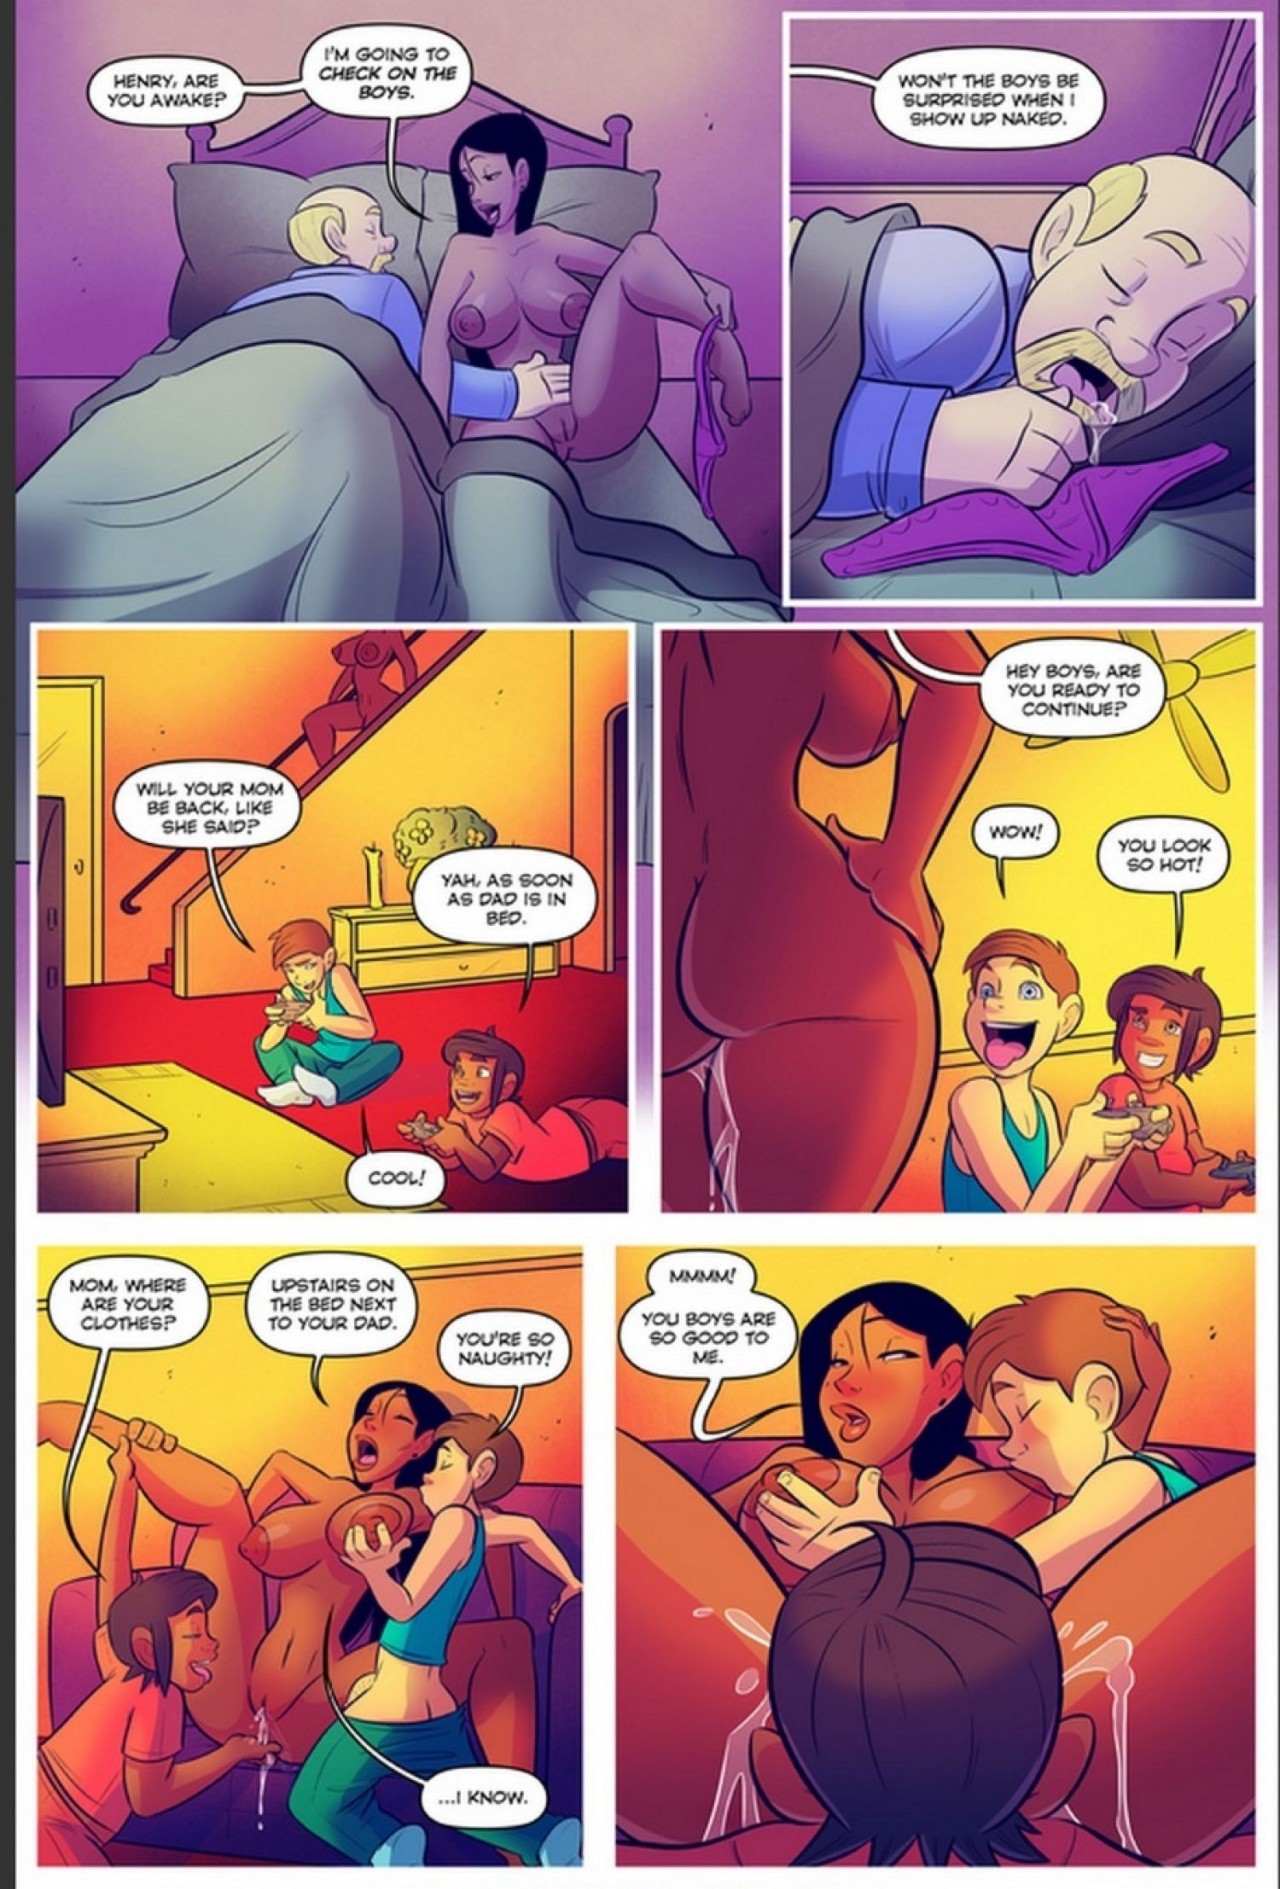 Keeping It Up With The Joneses Part 4 Porn Comic english 20